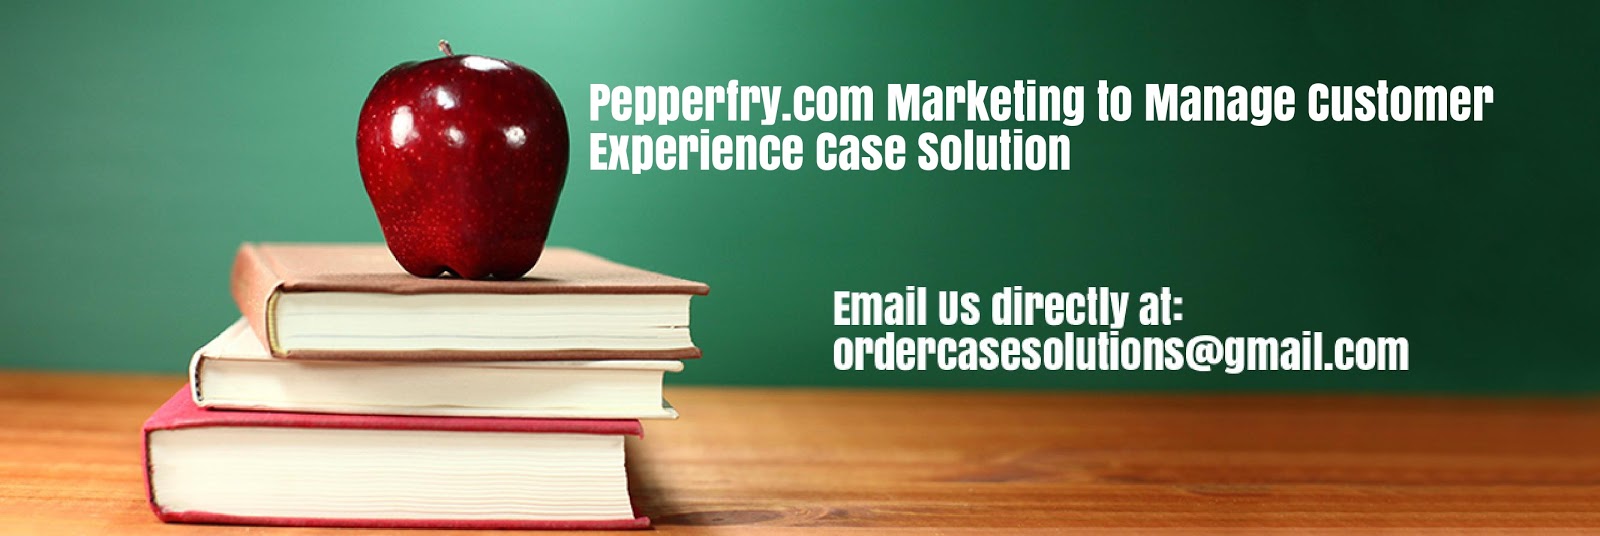 pepperfry-marketing-to-manage-customer-experience-case-study-analysis-solution-case